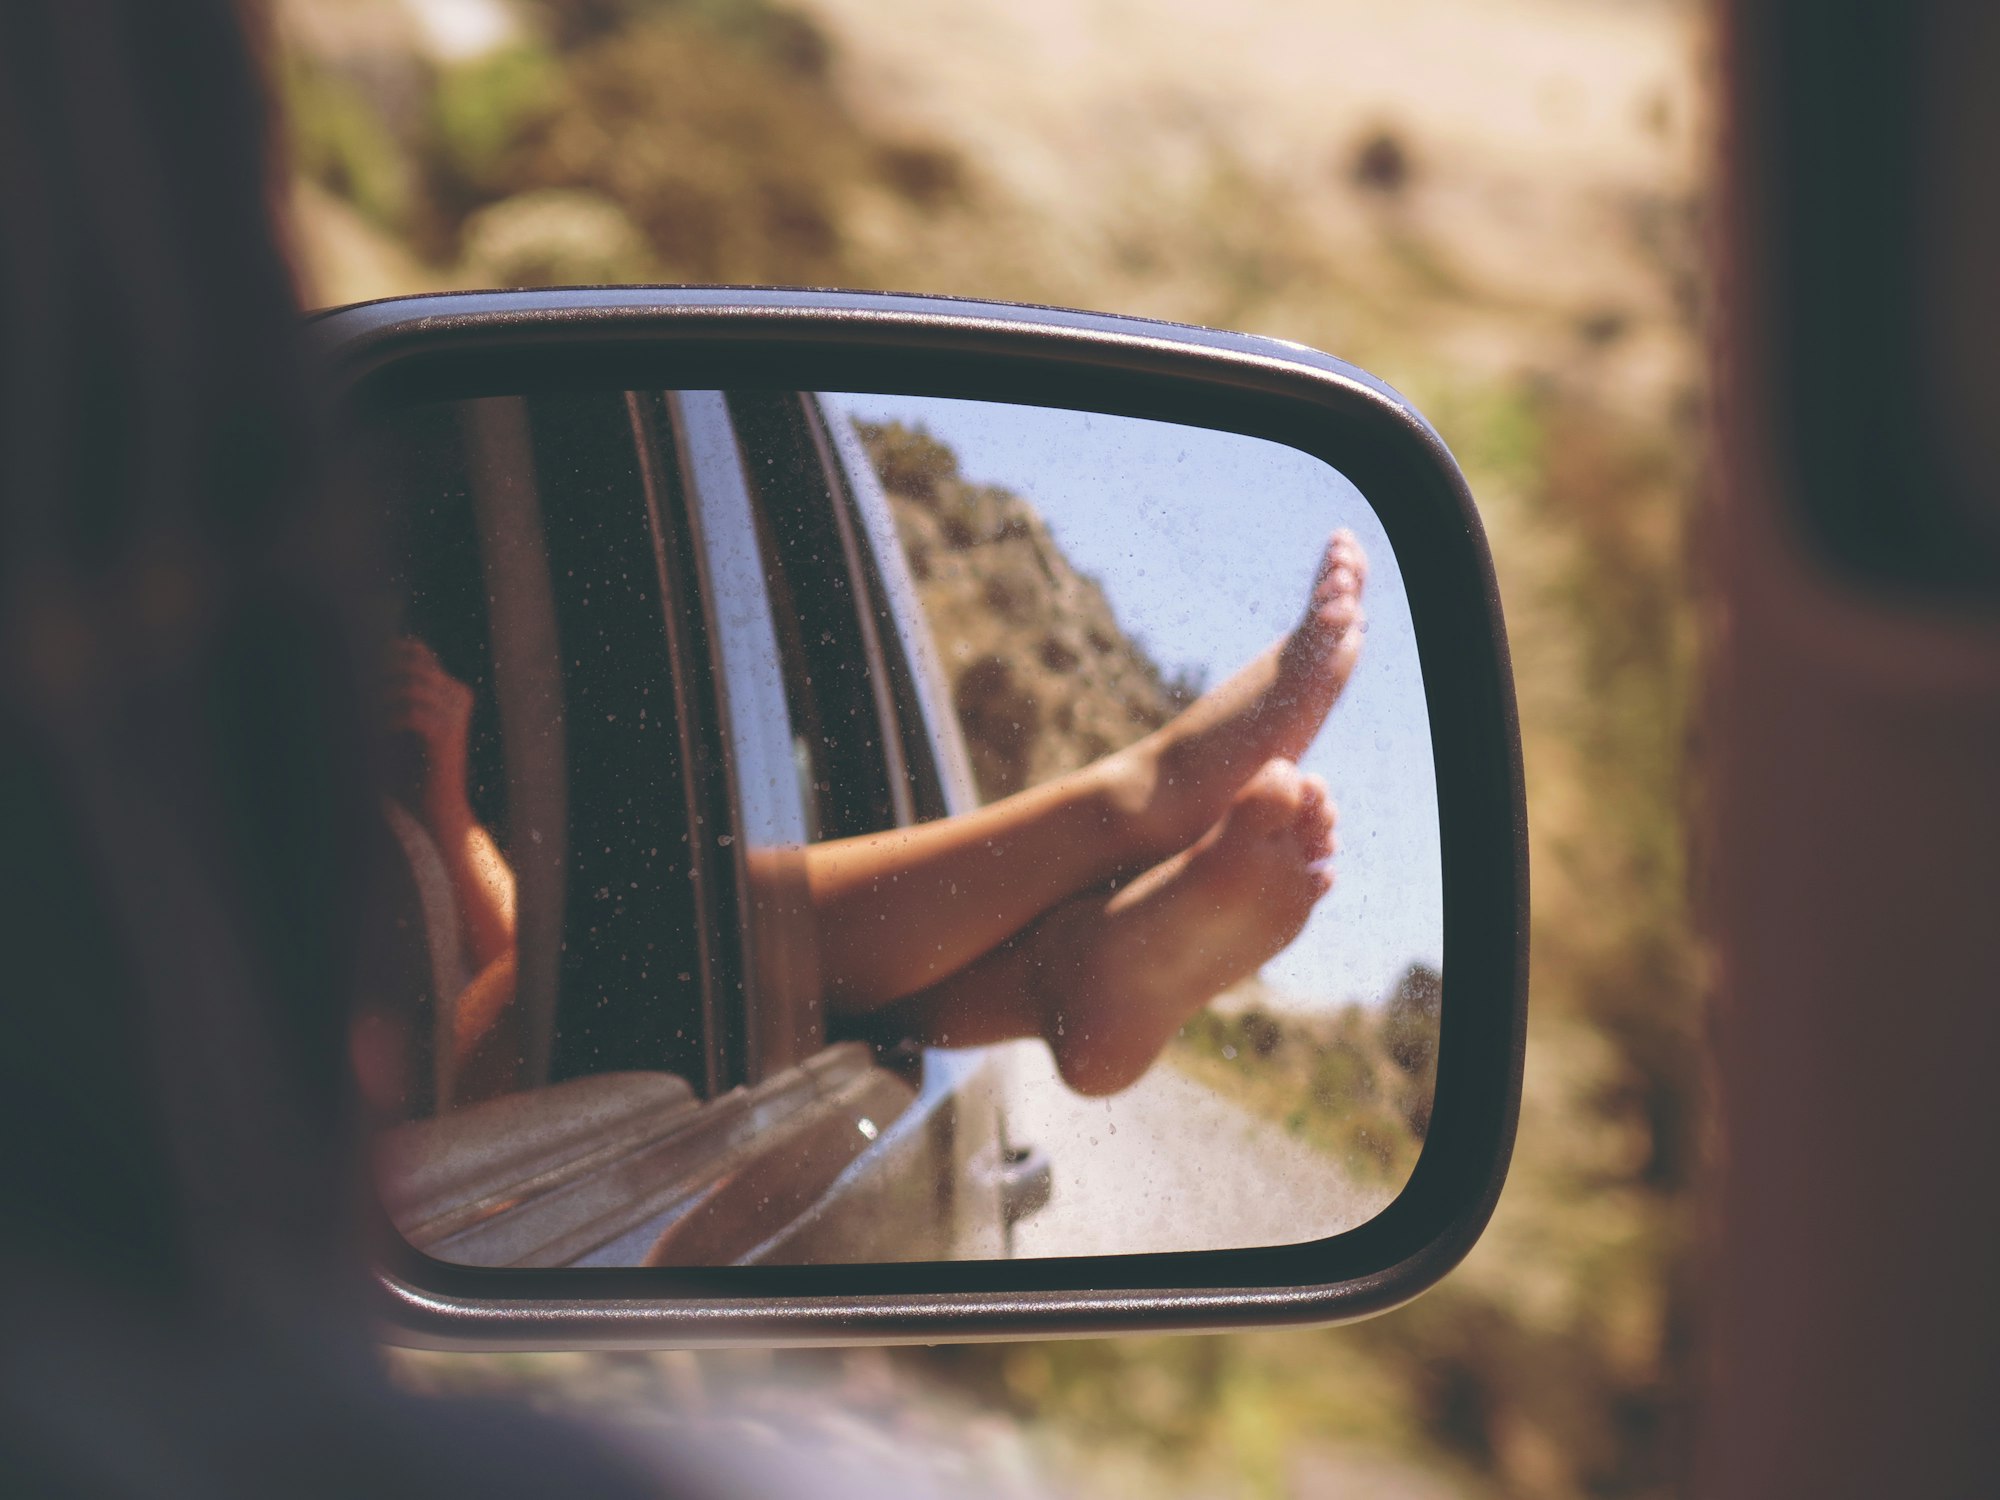 Objects in the mirror are faster than they appear.